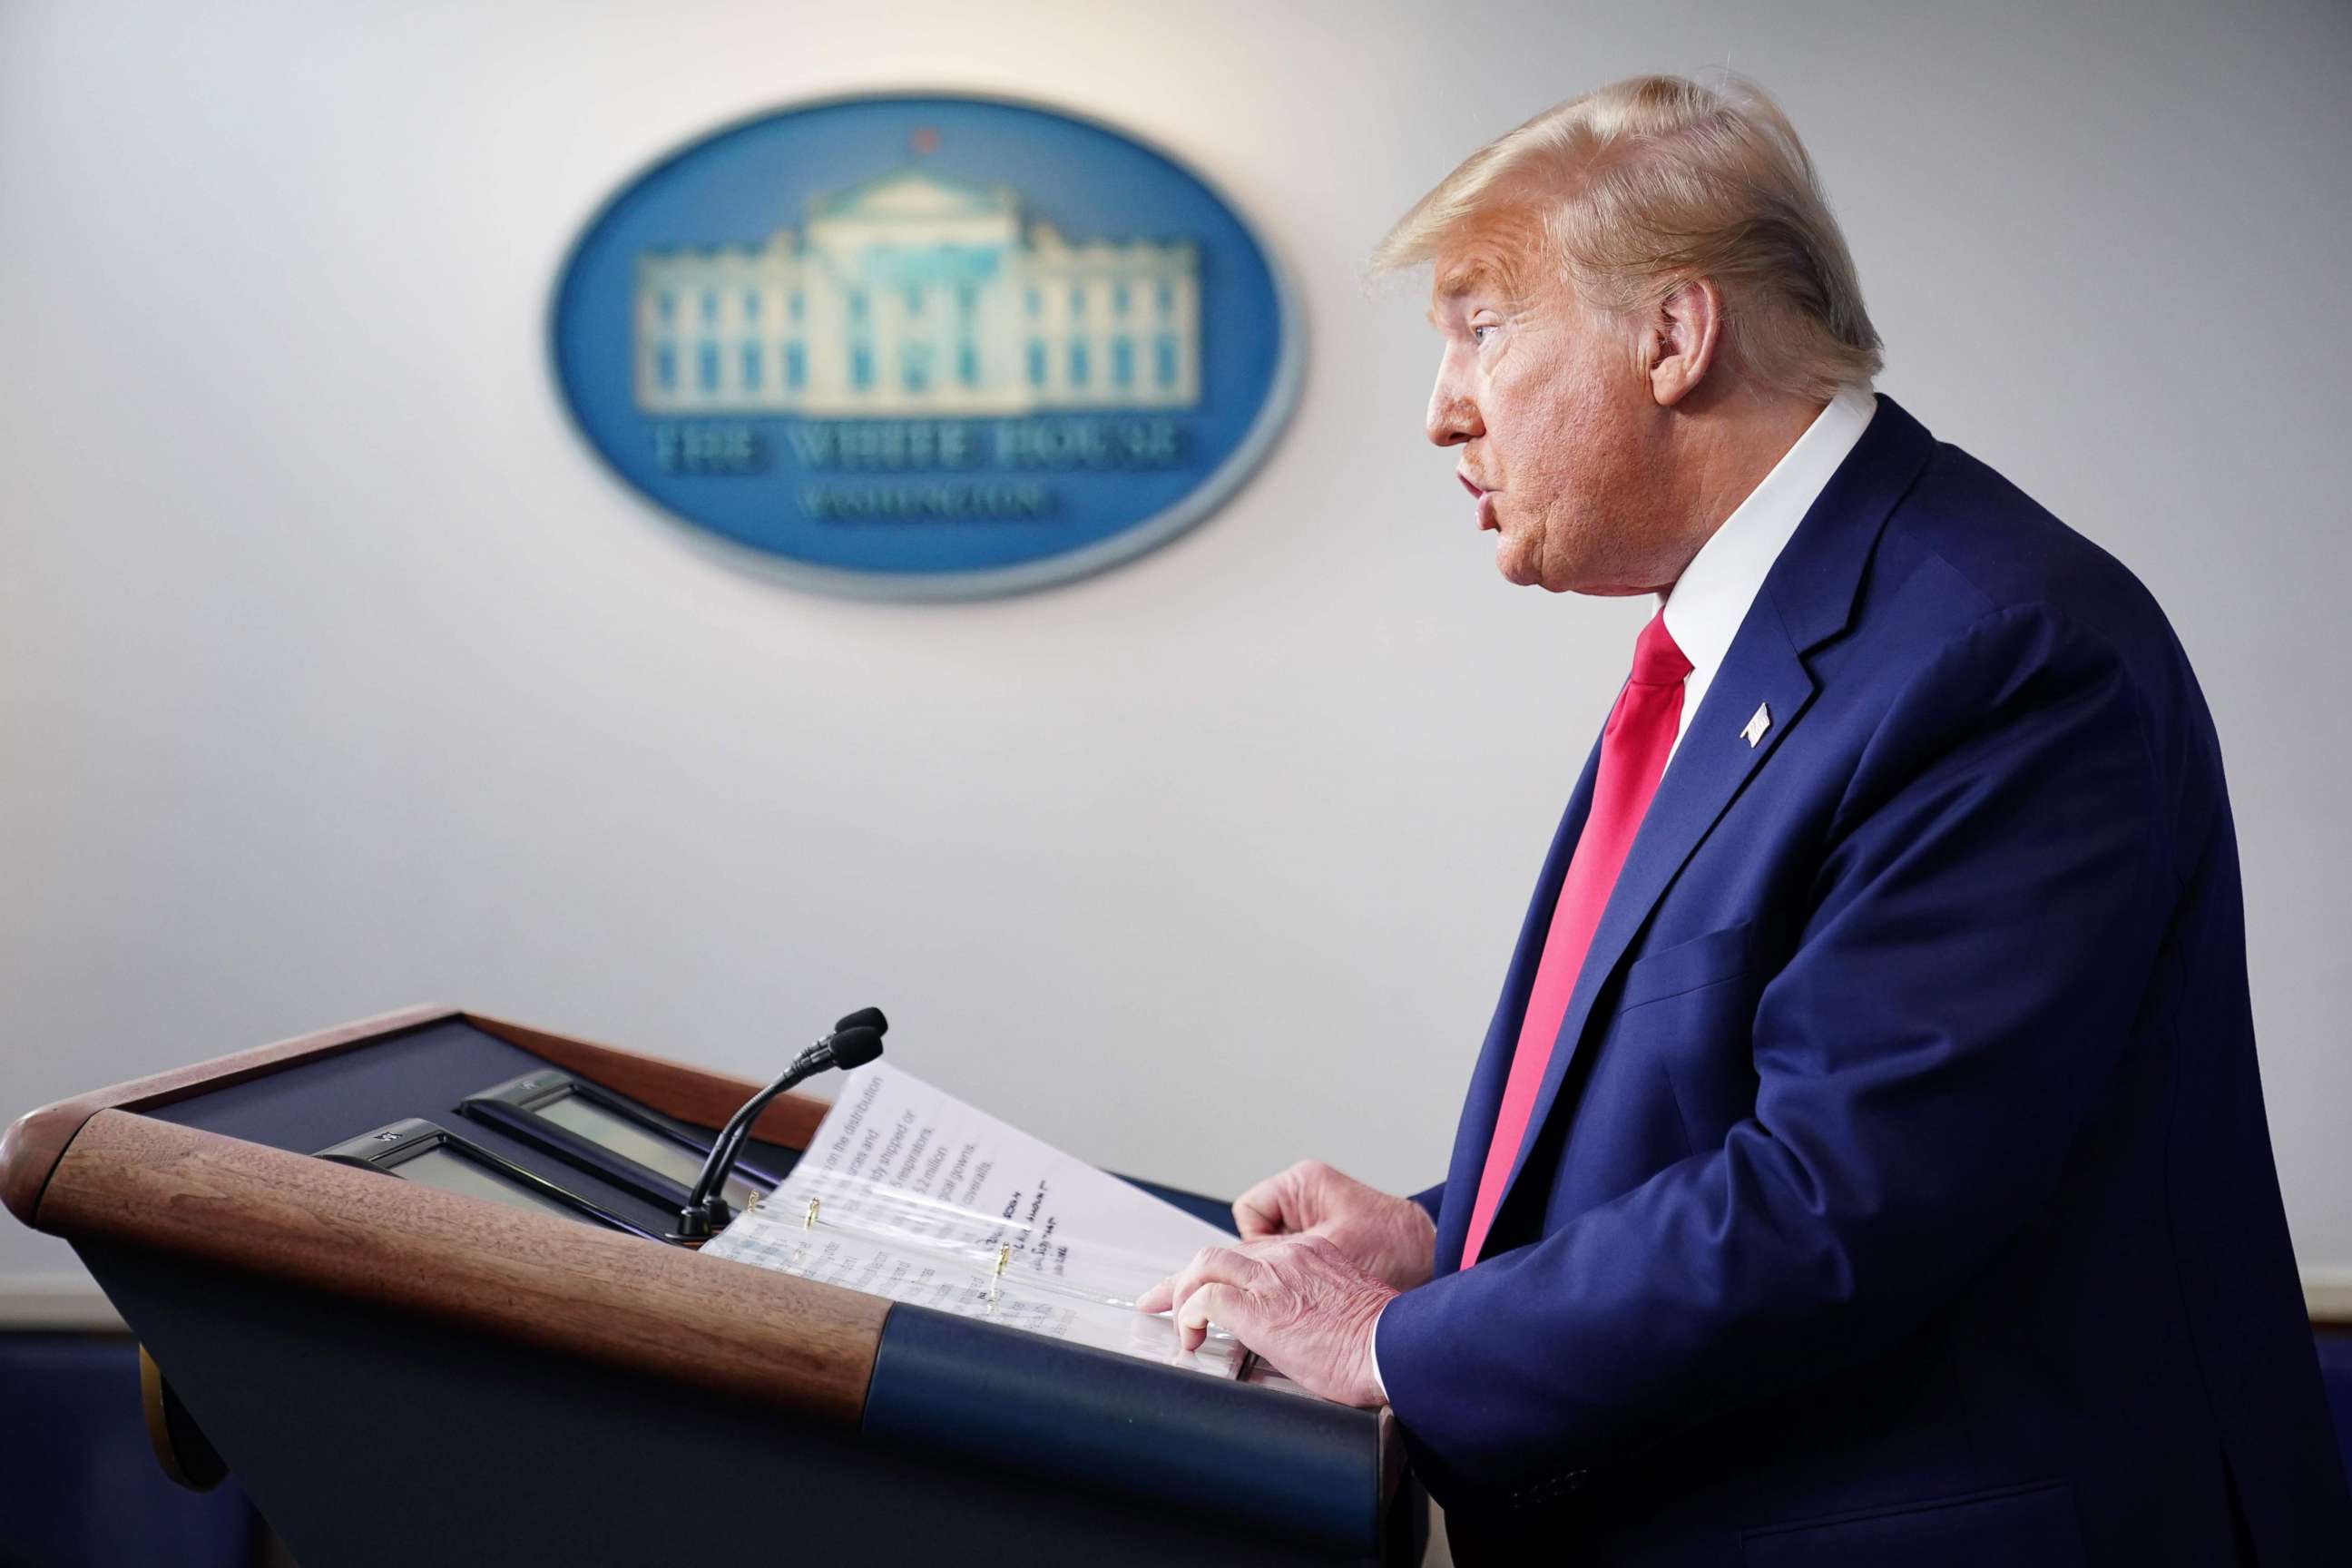 PHOTO: President Donald Trump speaks during the daily briefing on the novel coronavirus, COVID-19, in the Brady Briefing Room at the White House, March 31, 2020, in Washington, DC.